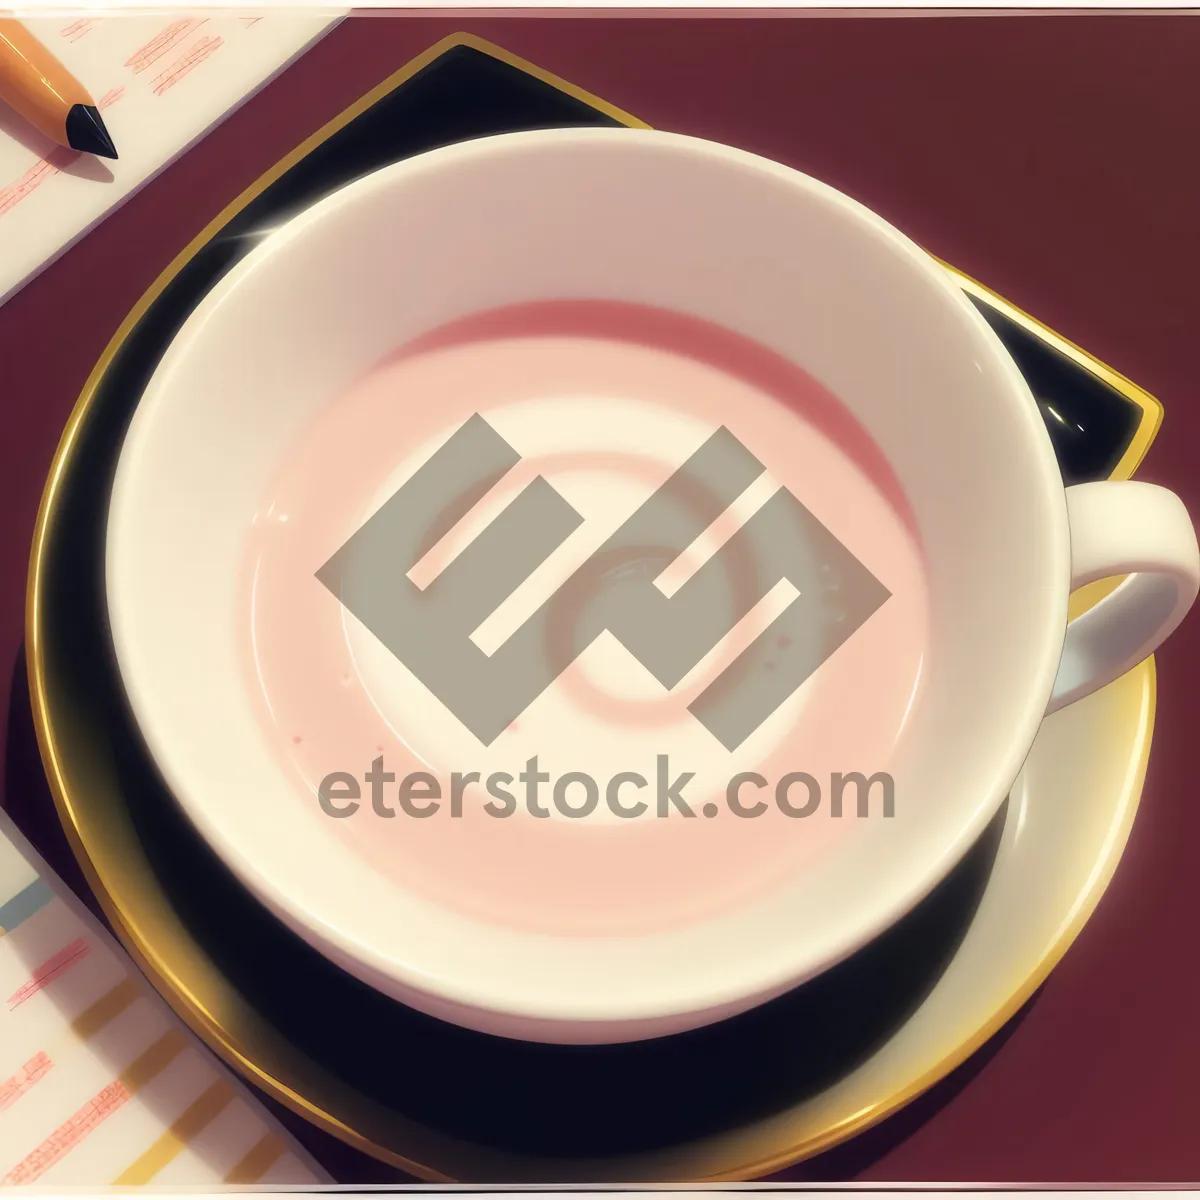 Picture of Steamy Morning Cup of Joe on Saucer